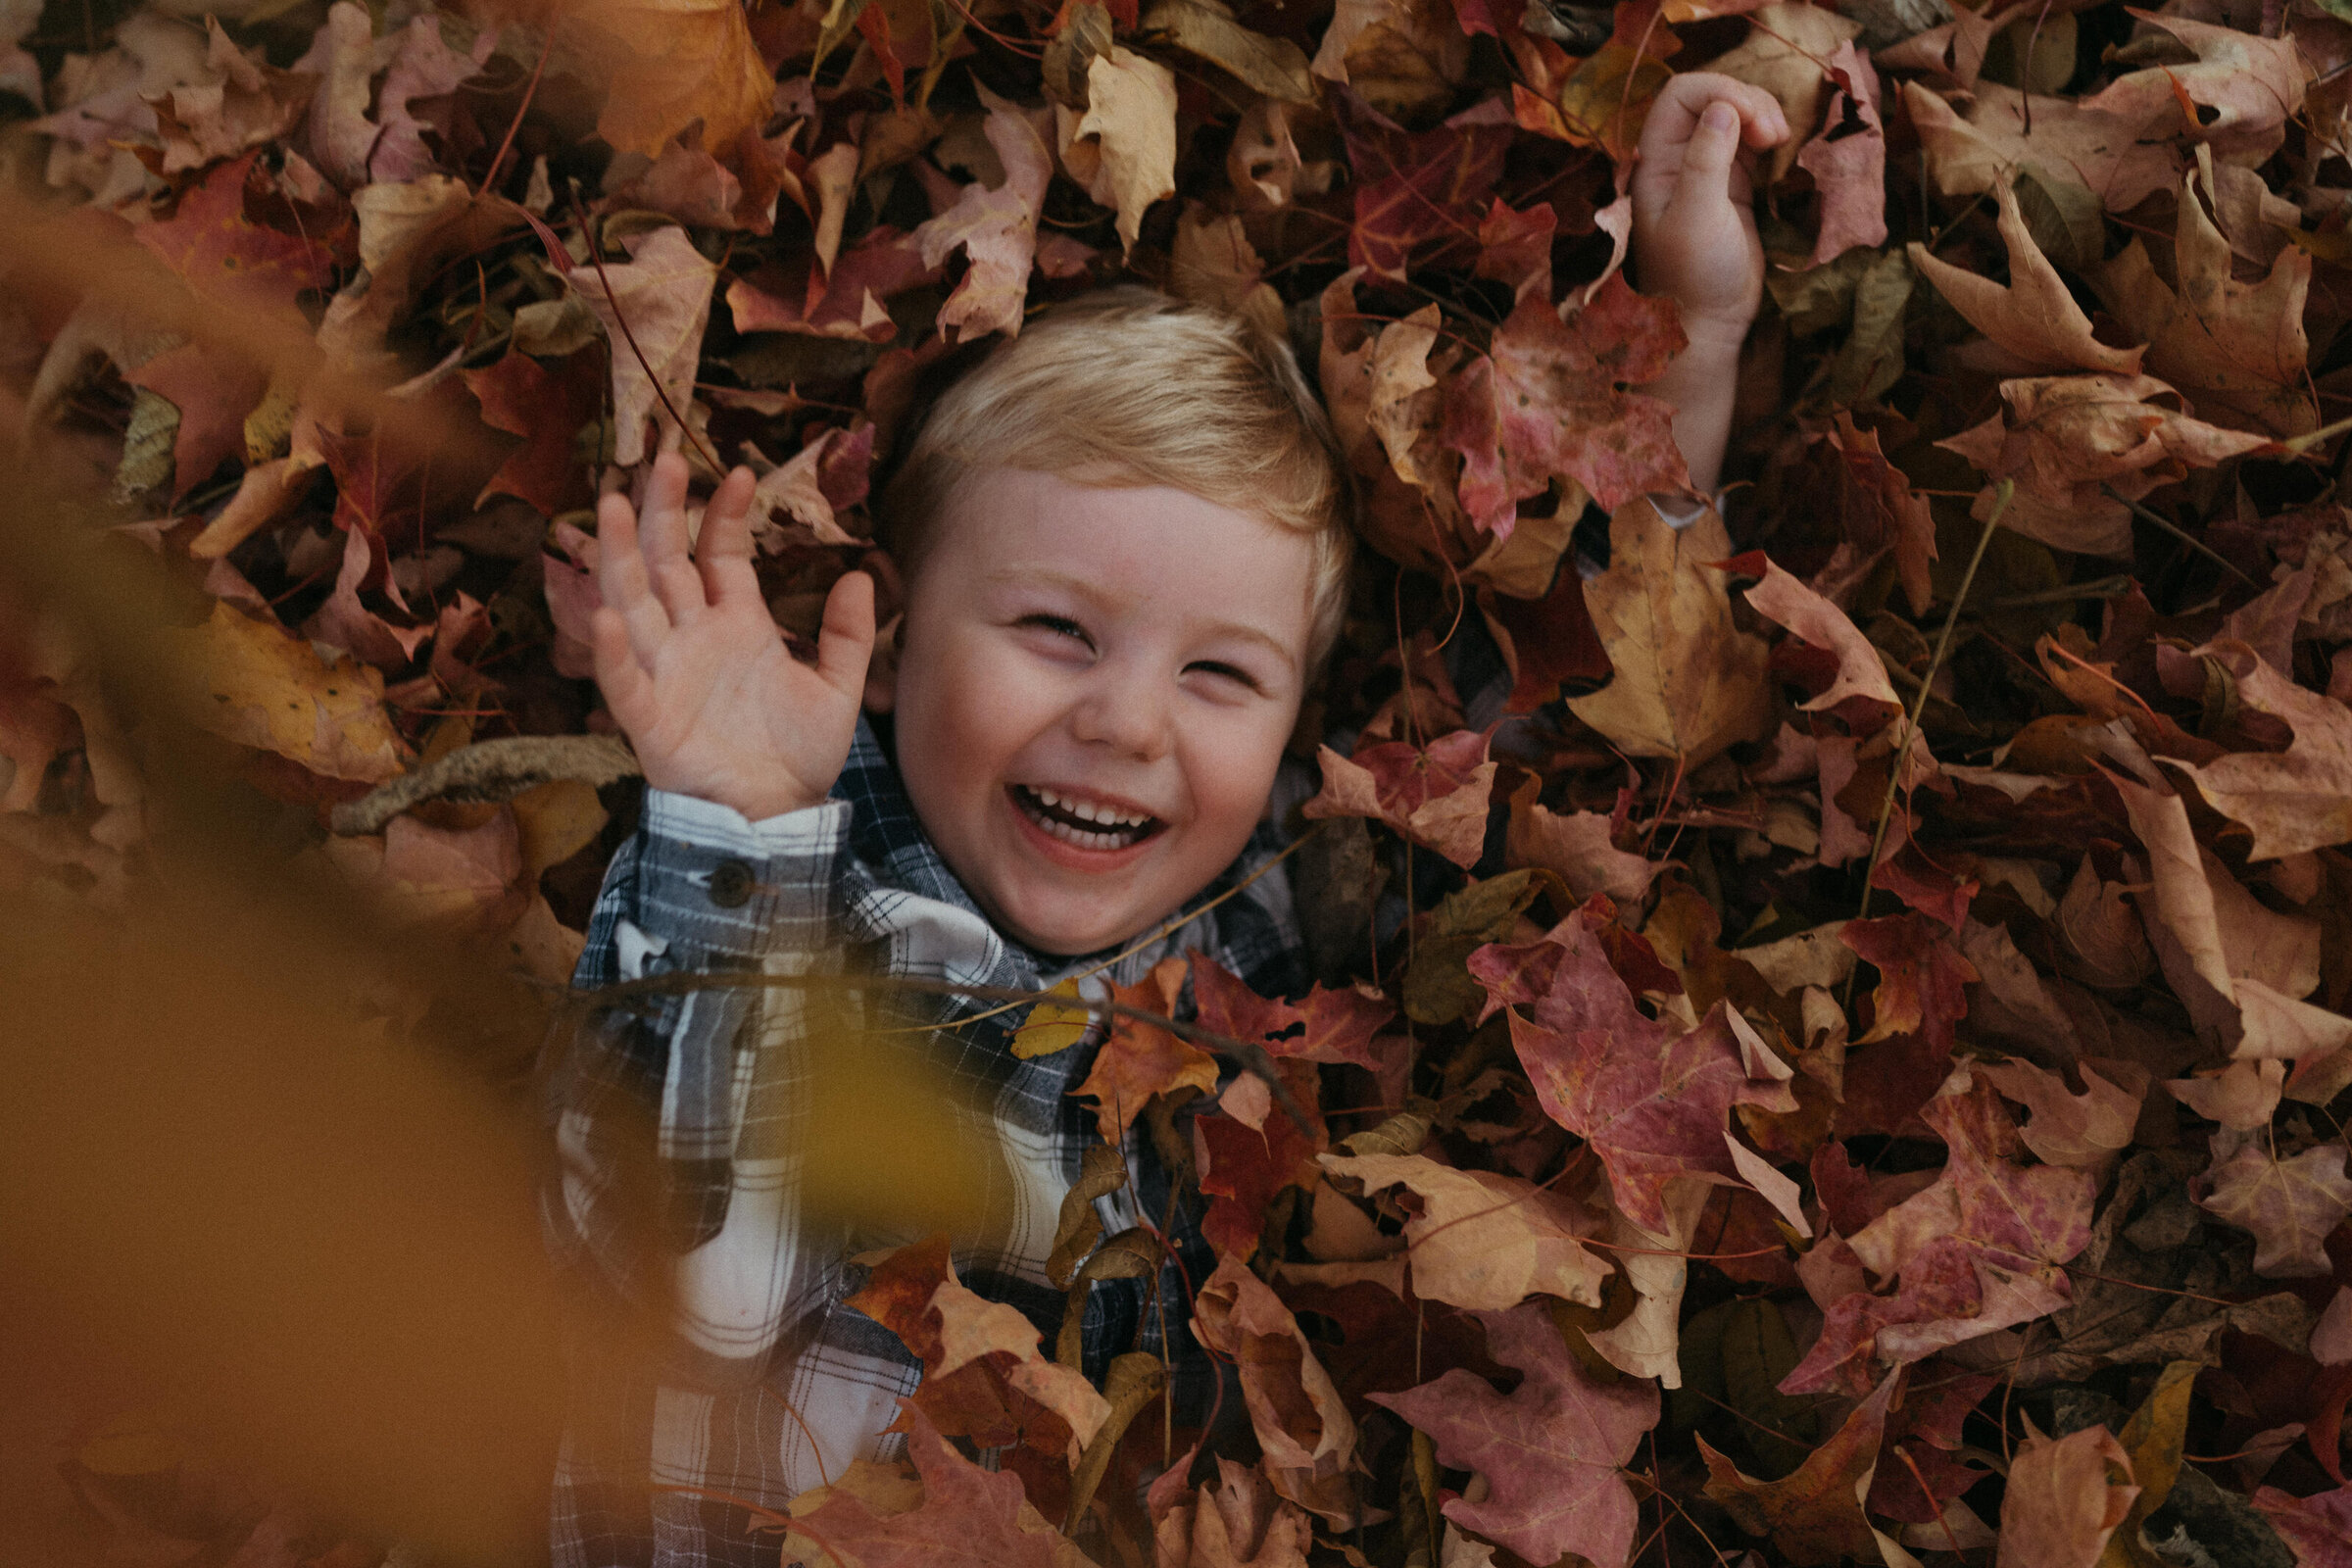 A blond toddler wearing a flannel shirt giggles covered in a pile of fall leaves